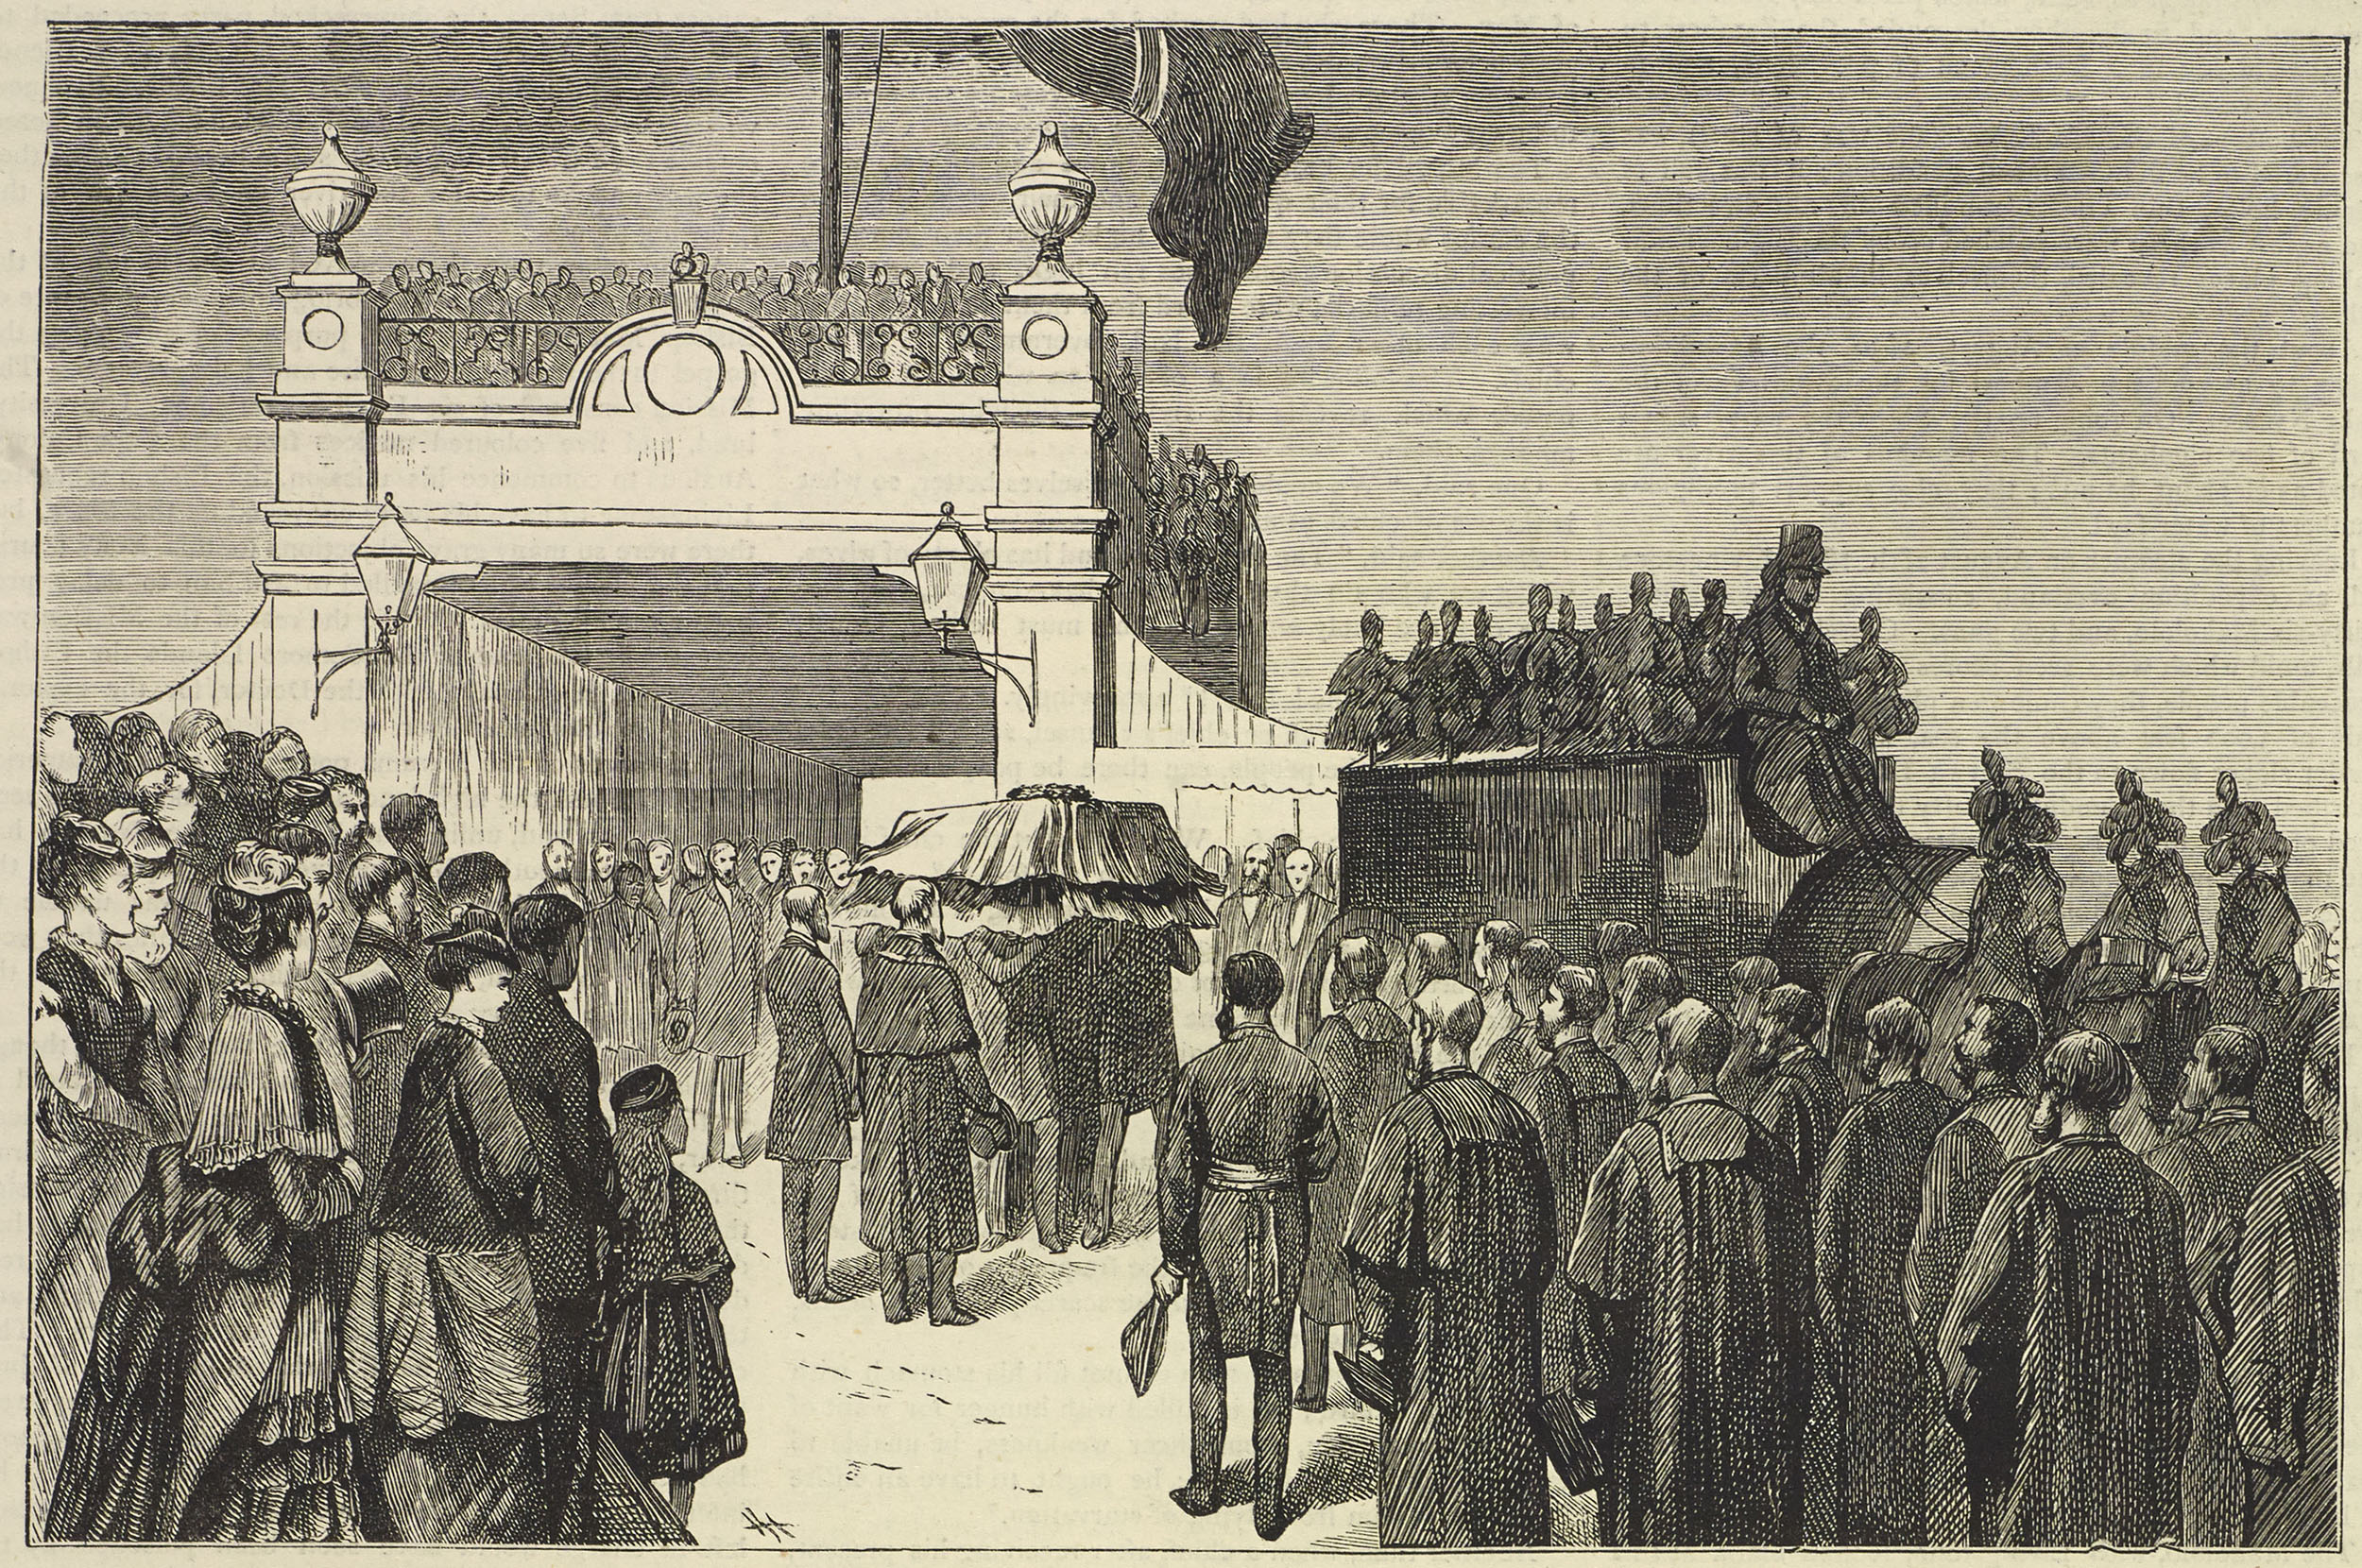 The Scene at the Pier, Southhampton. Illustration from 'The Life and Labours of David Livingstone' (Stanley 1874:404). Copyright National Library of Scotland. Creative Commons Share-alike 2.5 UK: Scotland (https://creativecommons.org/licenses/by-nc-sa/2.5/scotland/).